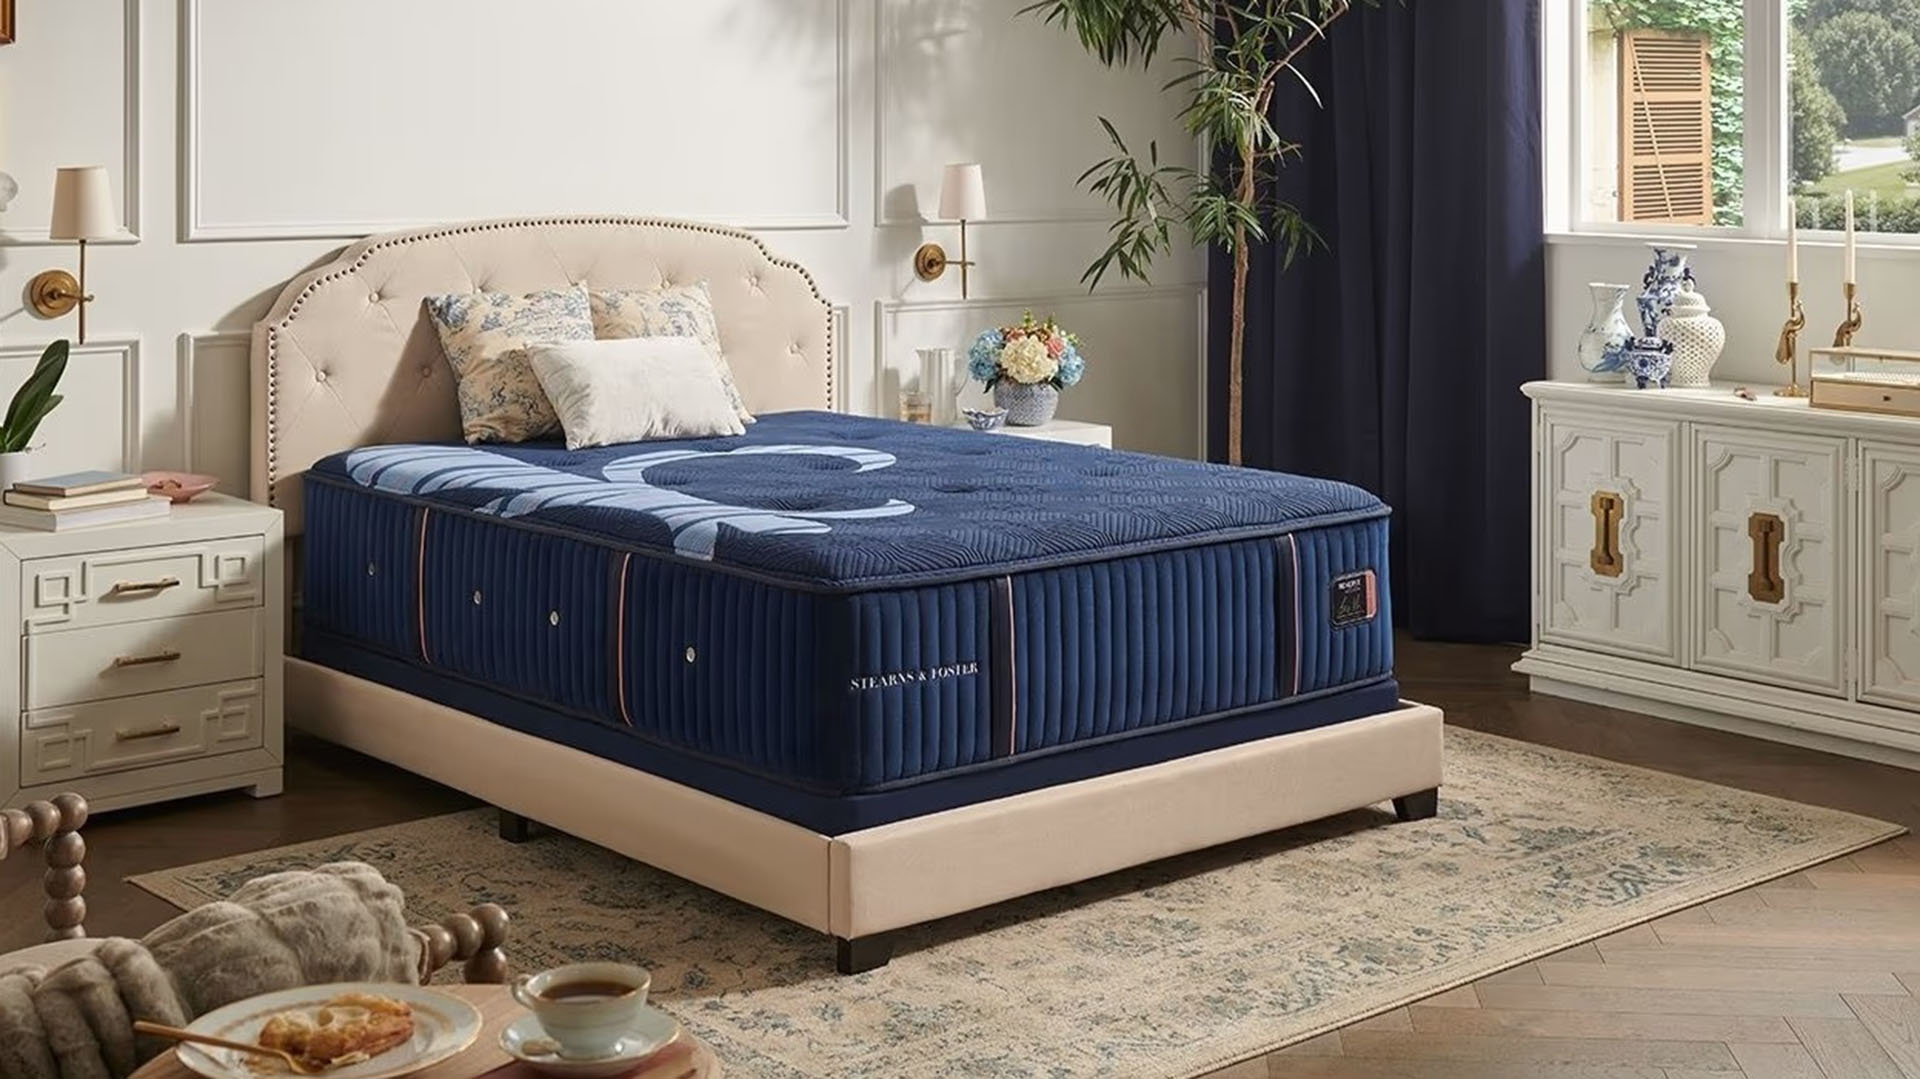 Stearns & Foster mattresses in Lawton are designed with comfort and support in mind.